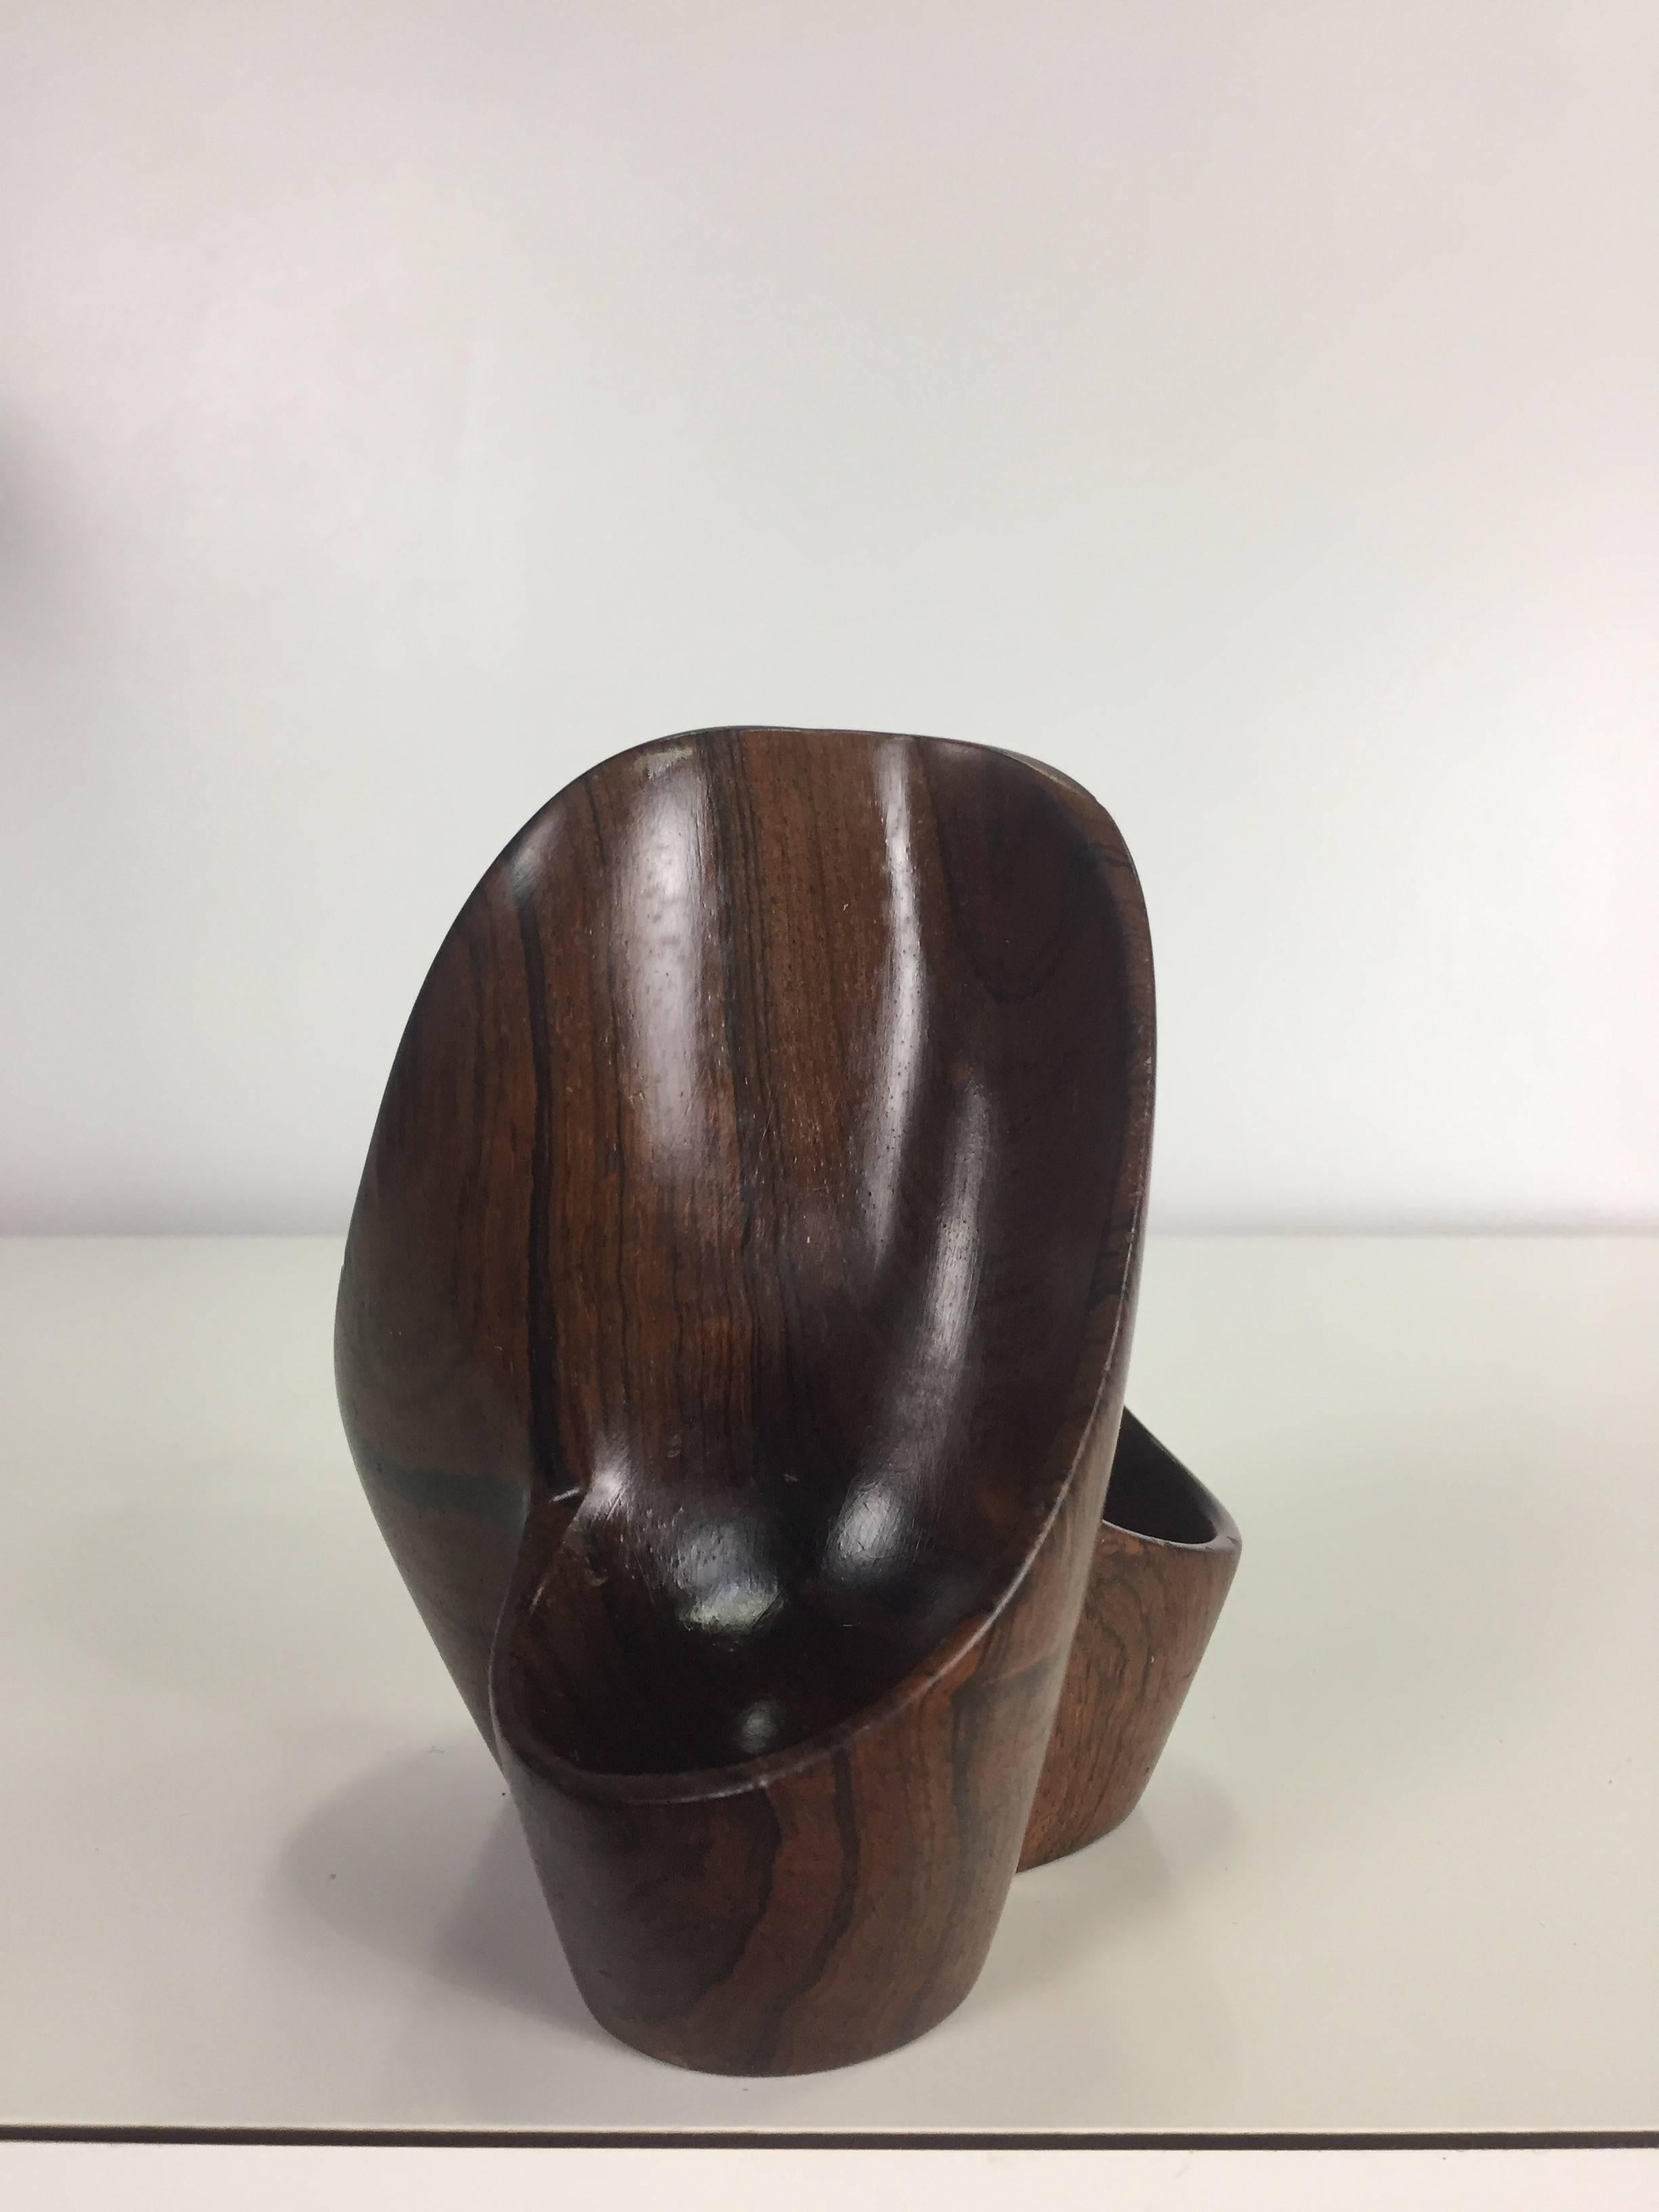 A lovely Mid-Century Modern Jacaranda wood pipe rest Stand designed by Jean Gillon for Italma, Brazil. The Italma wood art sticker is still on the base. It's in a good, used condition with minor surface scratches/marks commensurate with use.